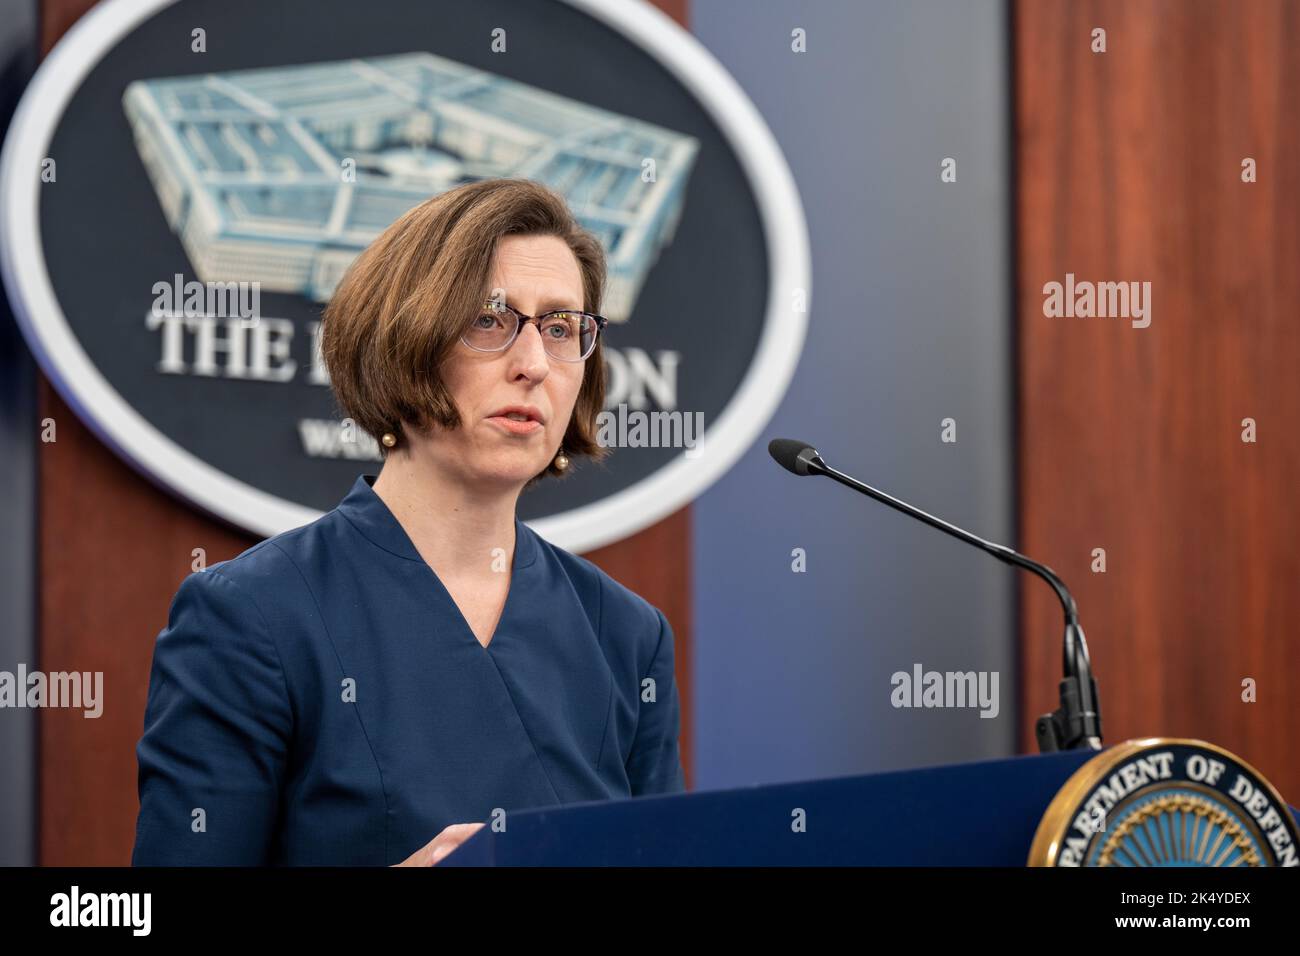 Arlington, United States Of America. 04th Oct, 2022. Arlington, United States of America. 04 October, 2022. U.S. Deputy Assistant to the Secretary of Defense Laura Cooper responds to a question during a press briefing at the Pentagon, October 4, 2022 in Arlington, Virginia. Cooper discussed the $625 million in additional security assistance for Ukraine including four new High Mobility Artillery Rocket Systems and Excalibur precision-guided rounds. Credit: TSgt. jack Sanders/DOD/Alamy Live News Stock Photo